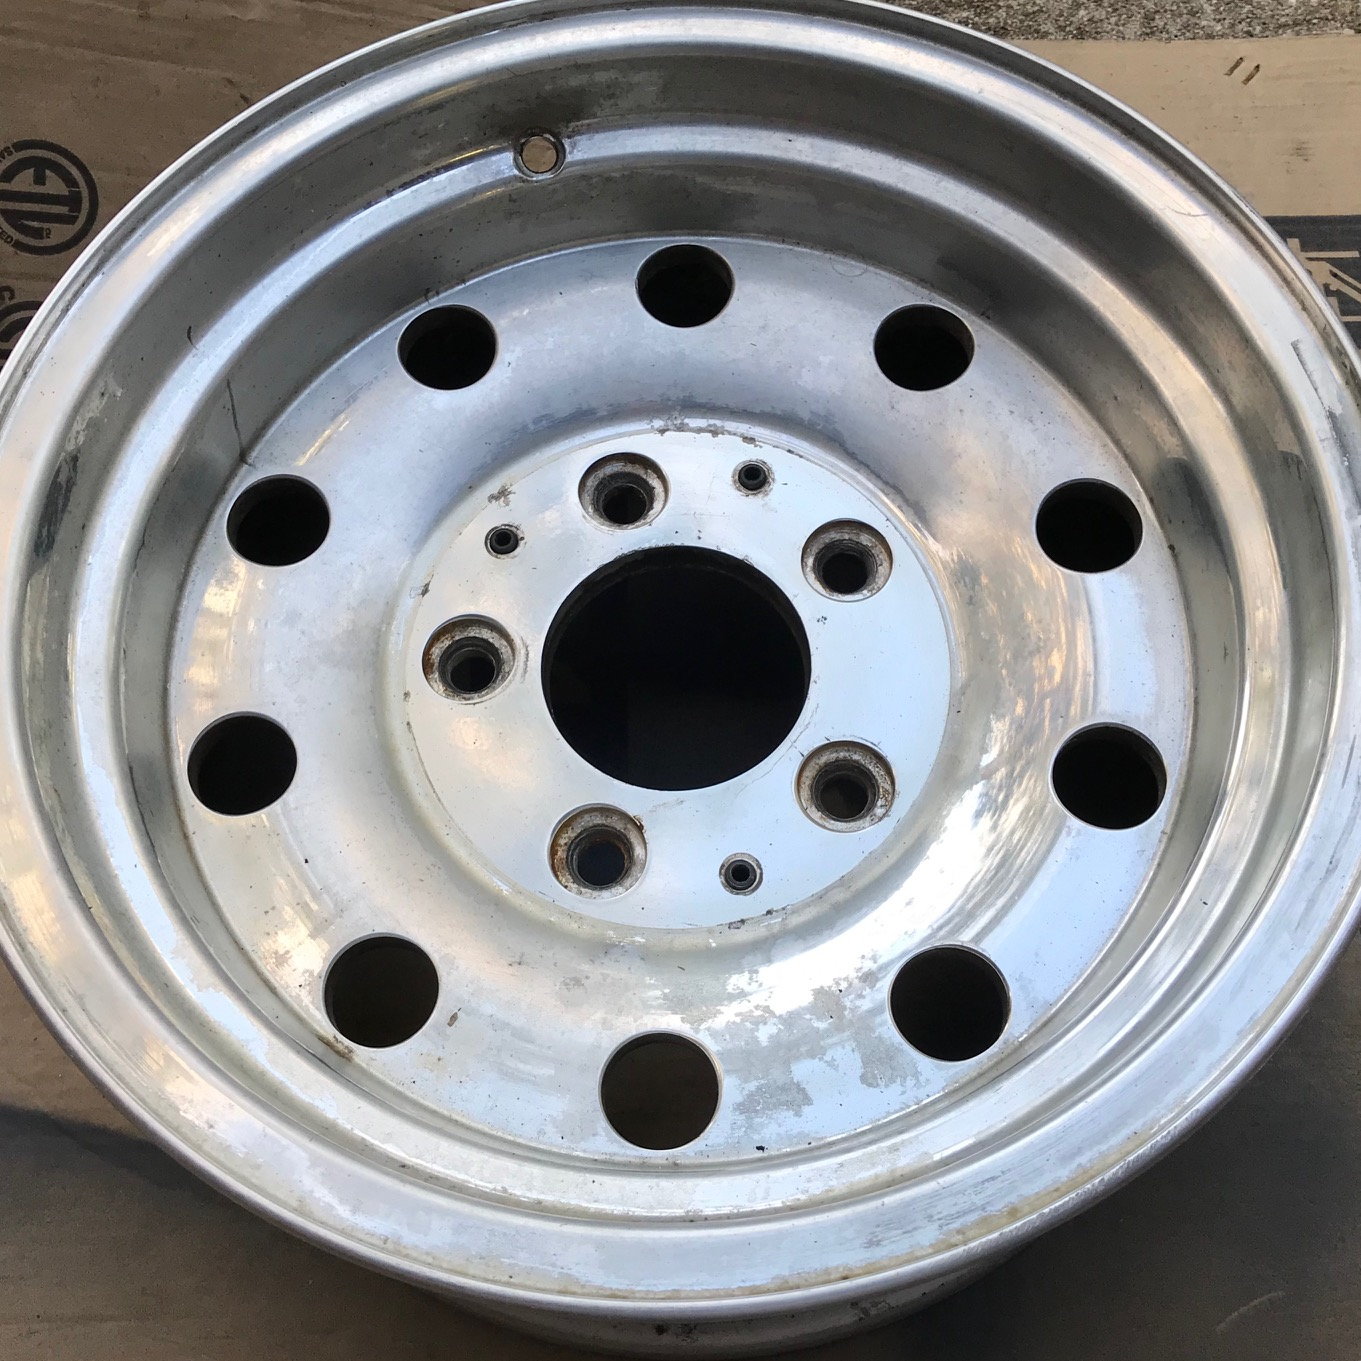 Bullet hole wheels - Ford F150 Forum - Community of Ford Truck Fans